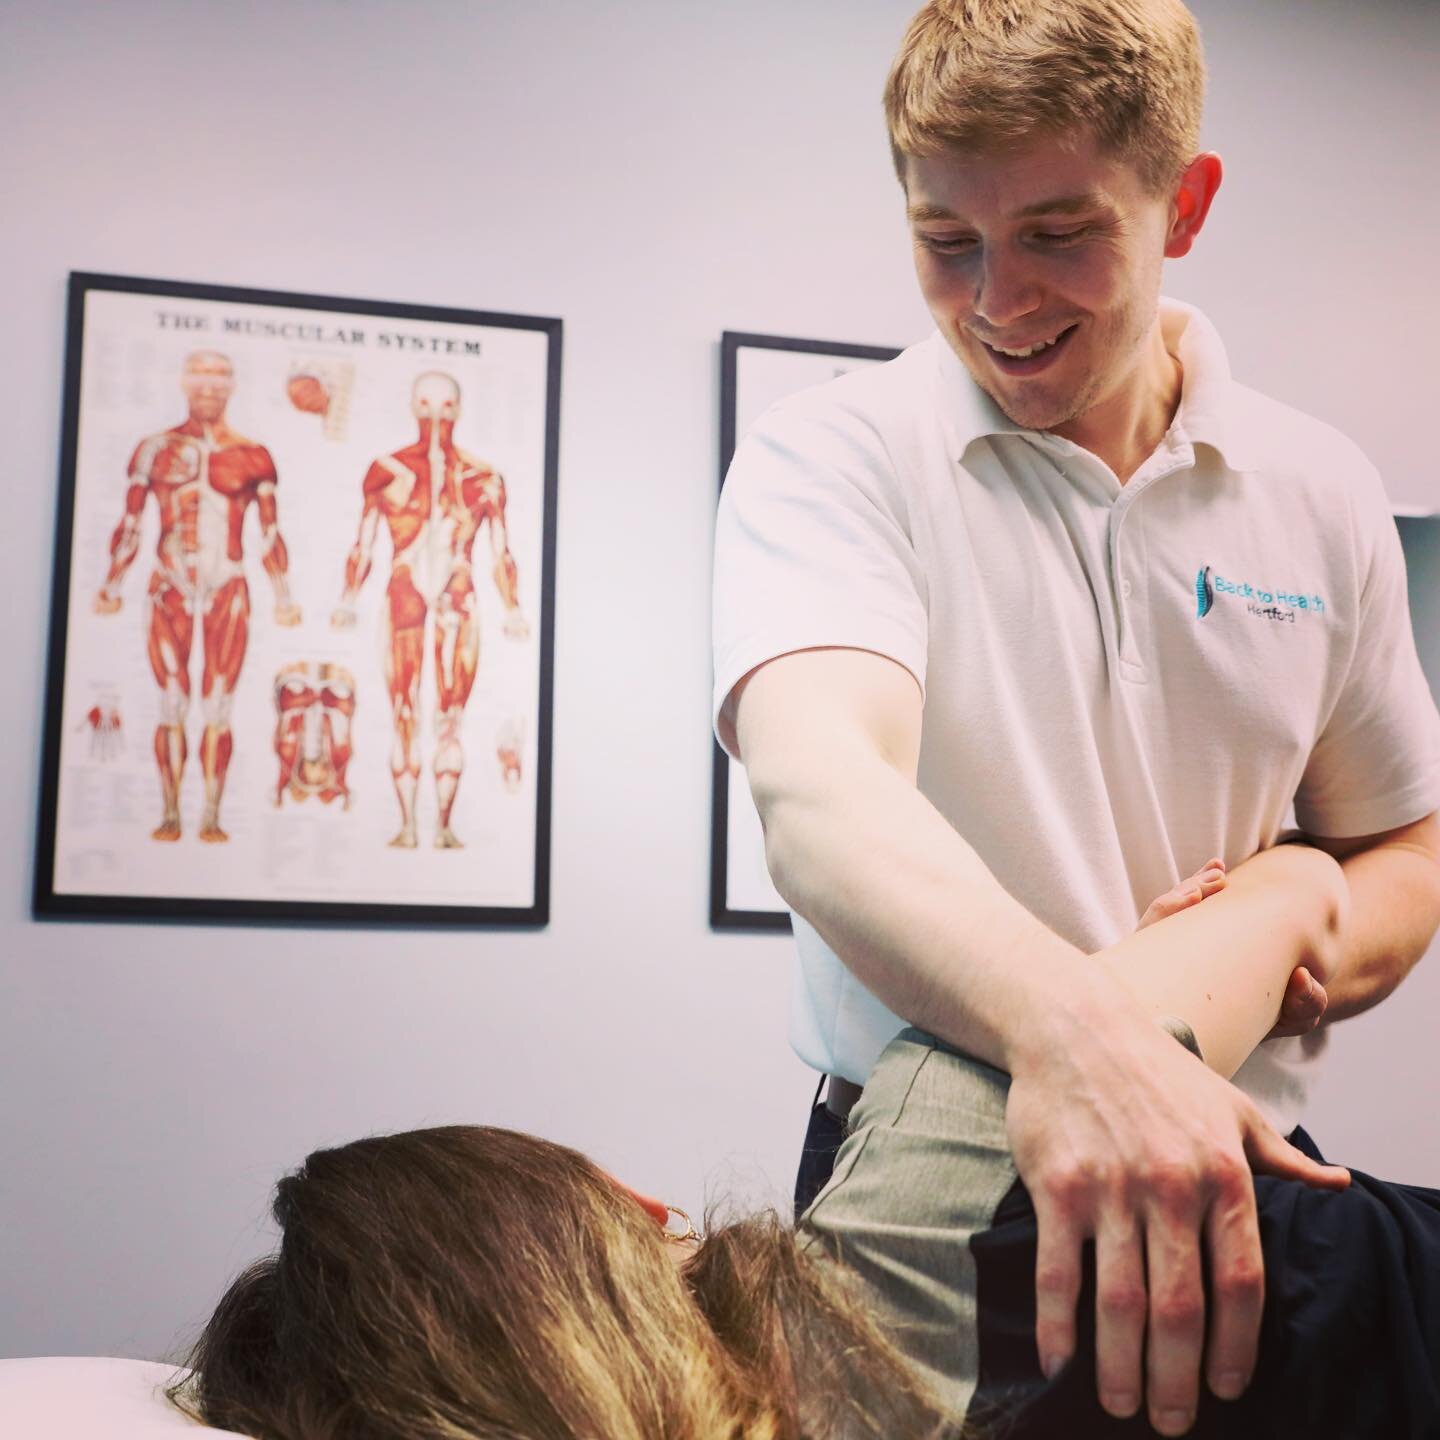 We&rsquo;re excited for a busy week @backtohealthhfd 
Don&rsquo;t forget you can now book your treatments through our new online booking system! Just visit our website! 
.
:
:

#backtohealth #hertford #ware #hertfordshire #gym #injury #sportsinjury #